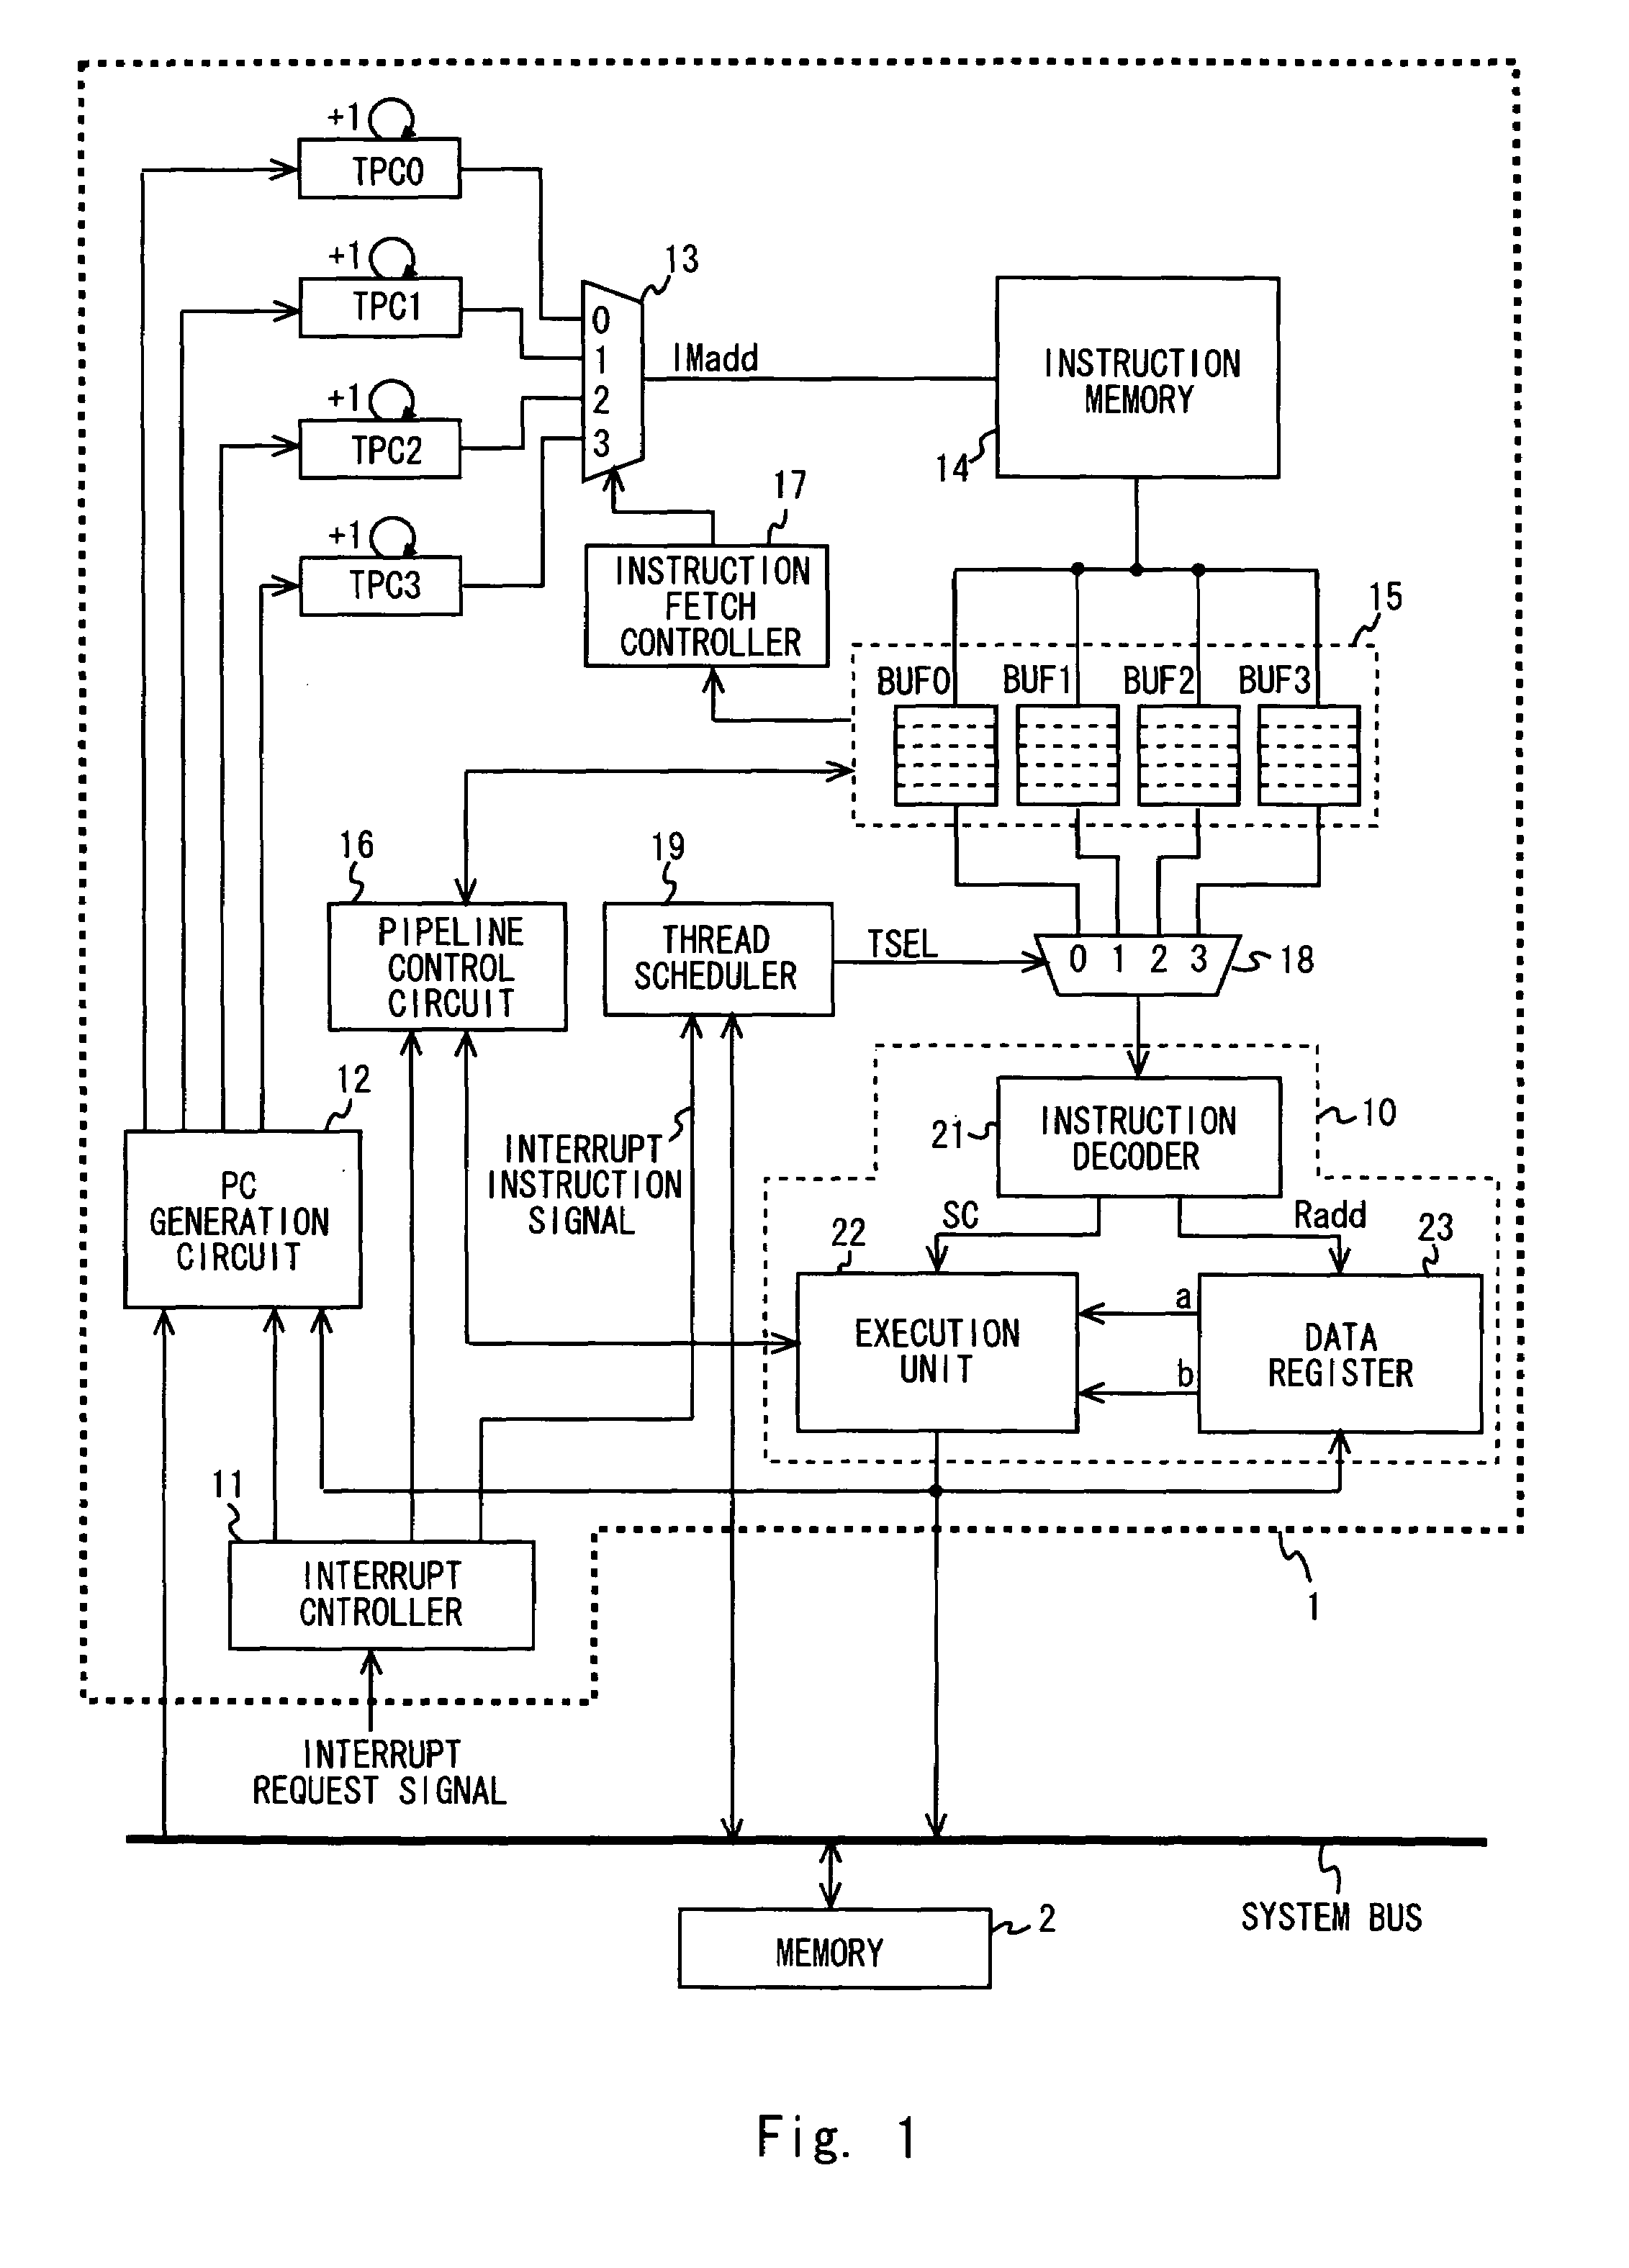 Multi-thread processor selecting threads on different schedule pattern for interrupt processing and normal operation